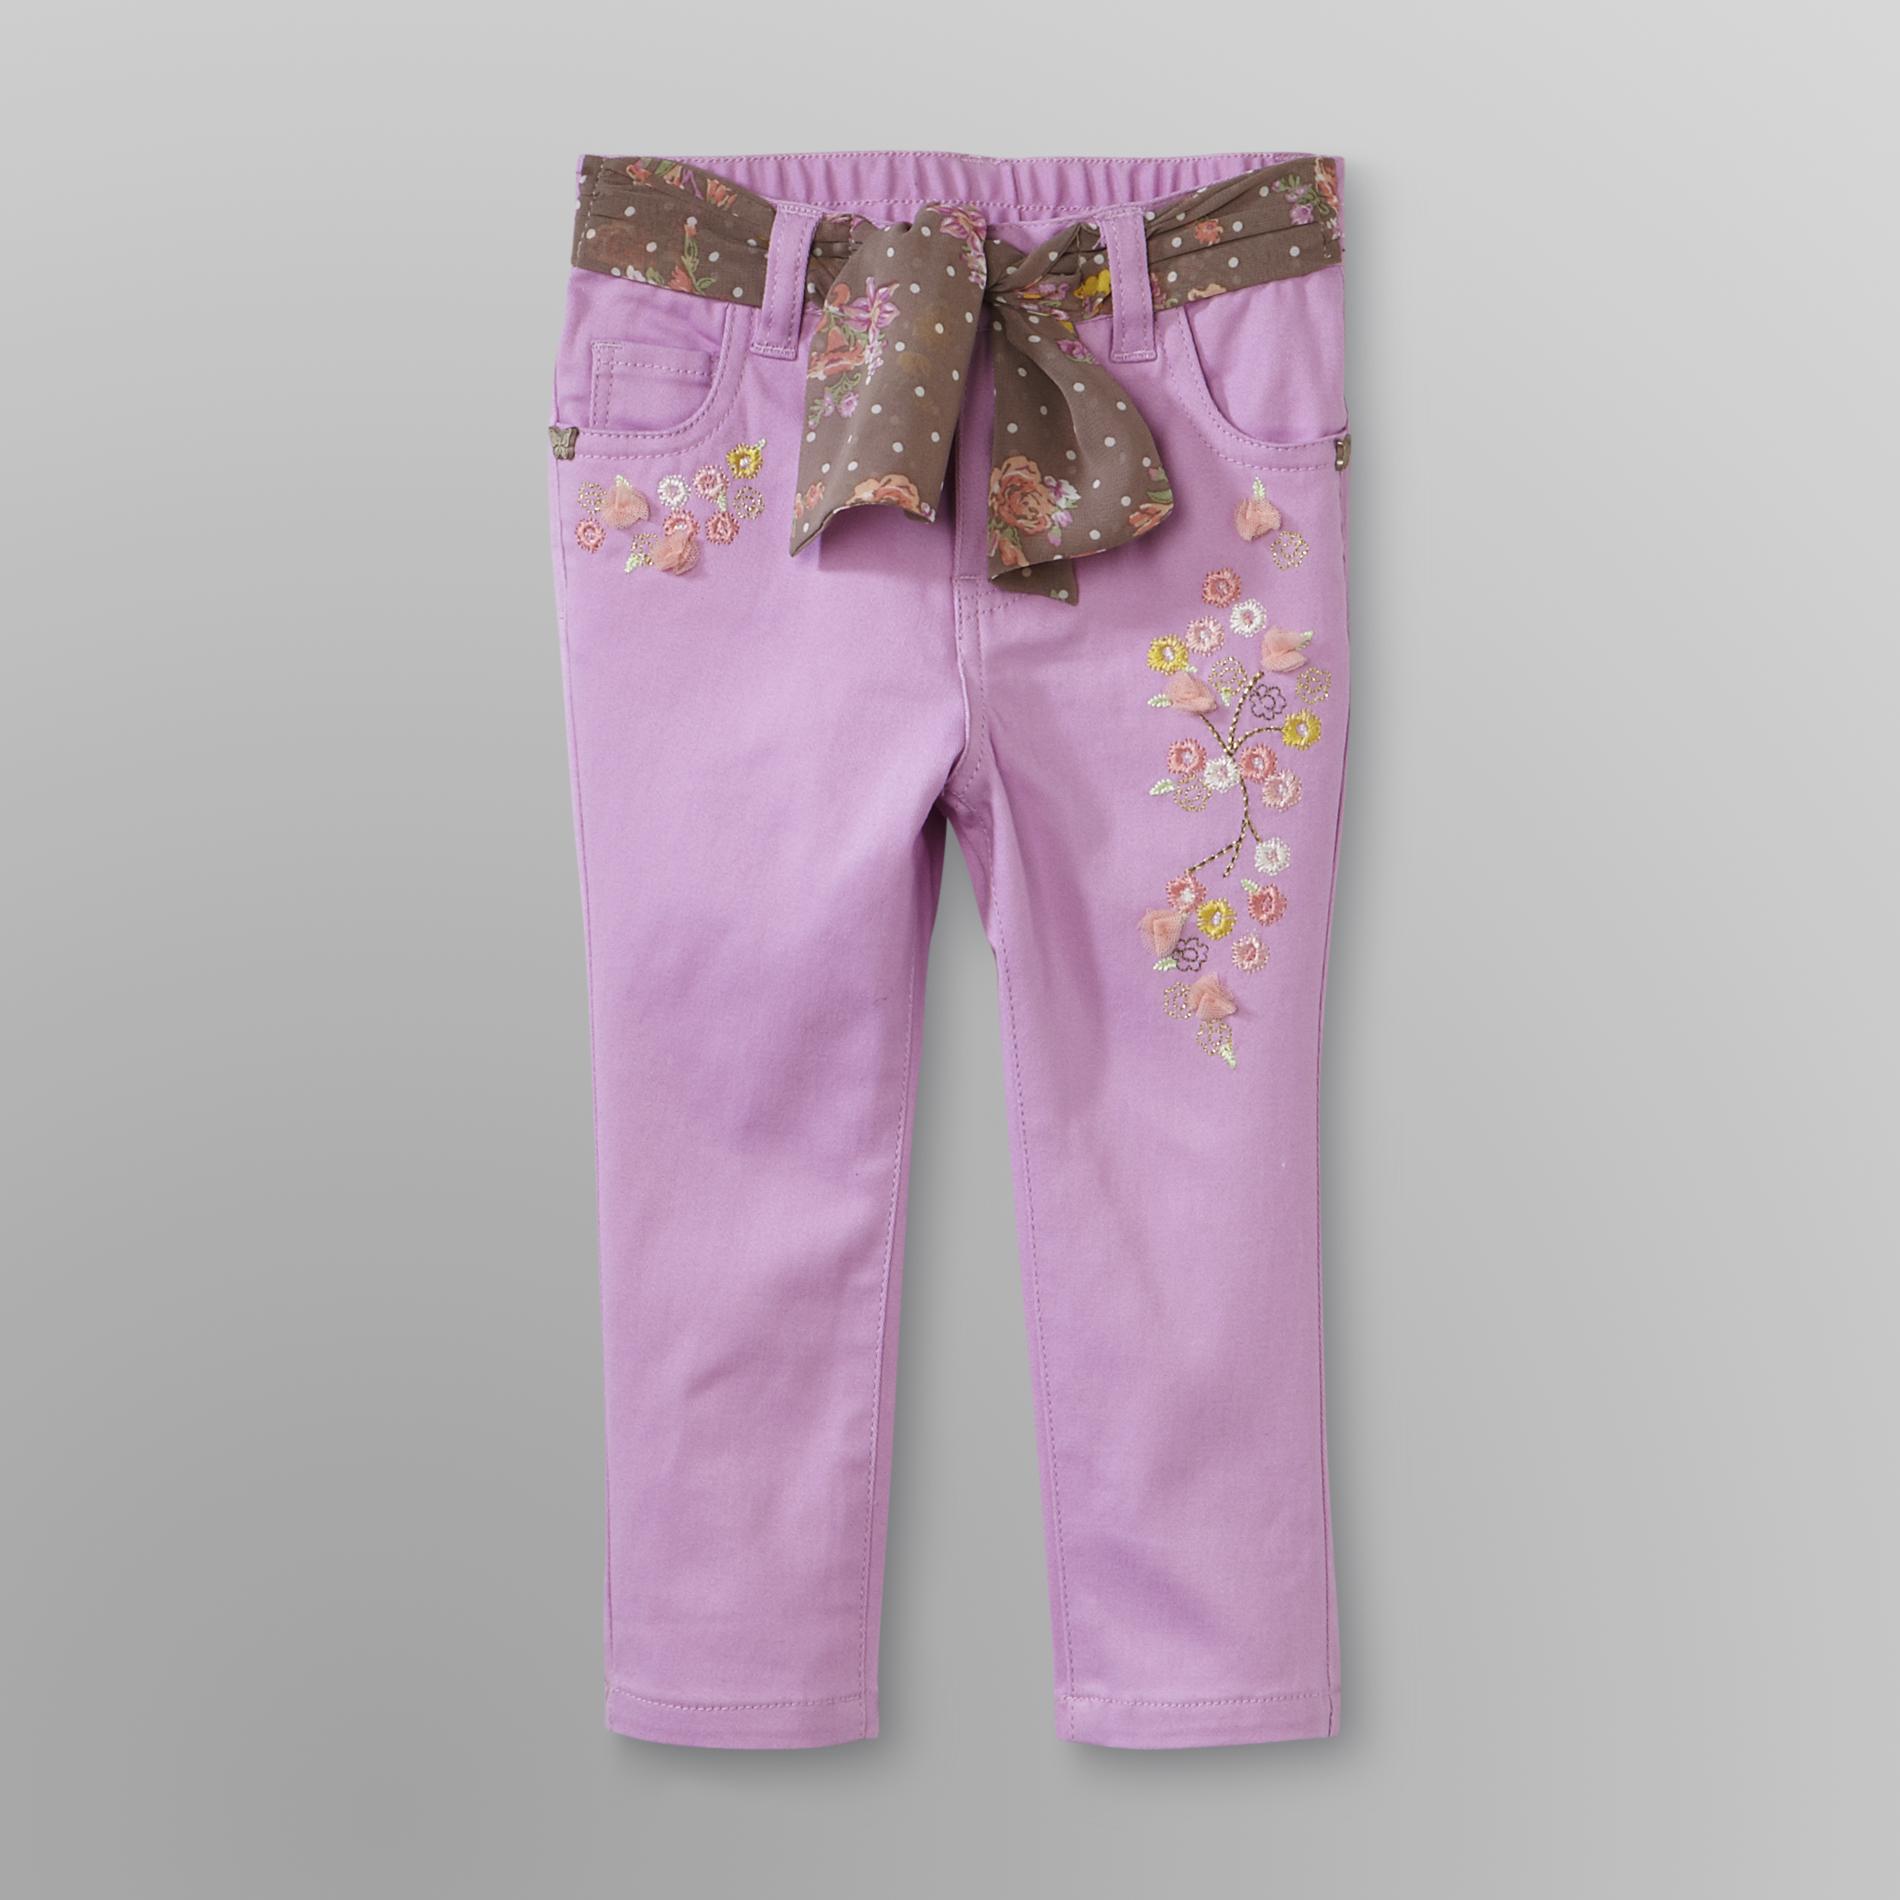 Route 66 Infant & Toddler Girl's Embroidered Colored Jeans